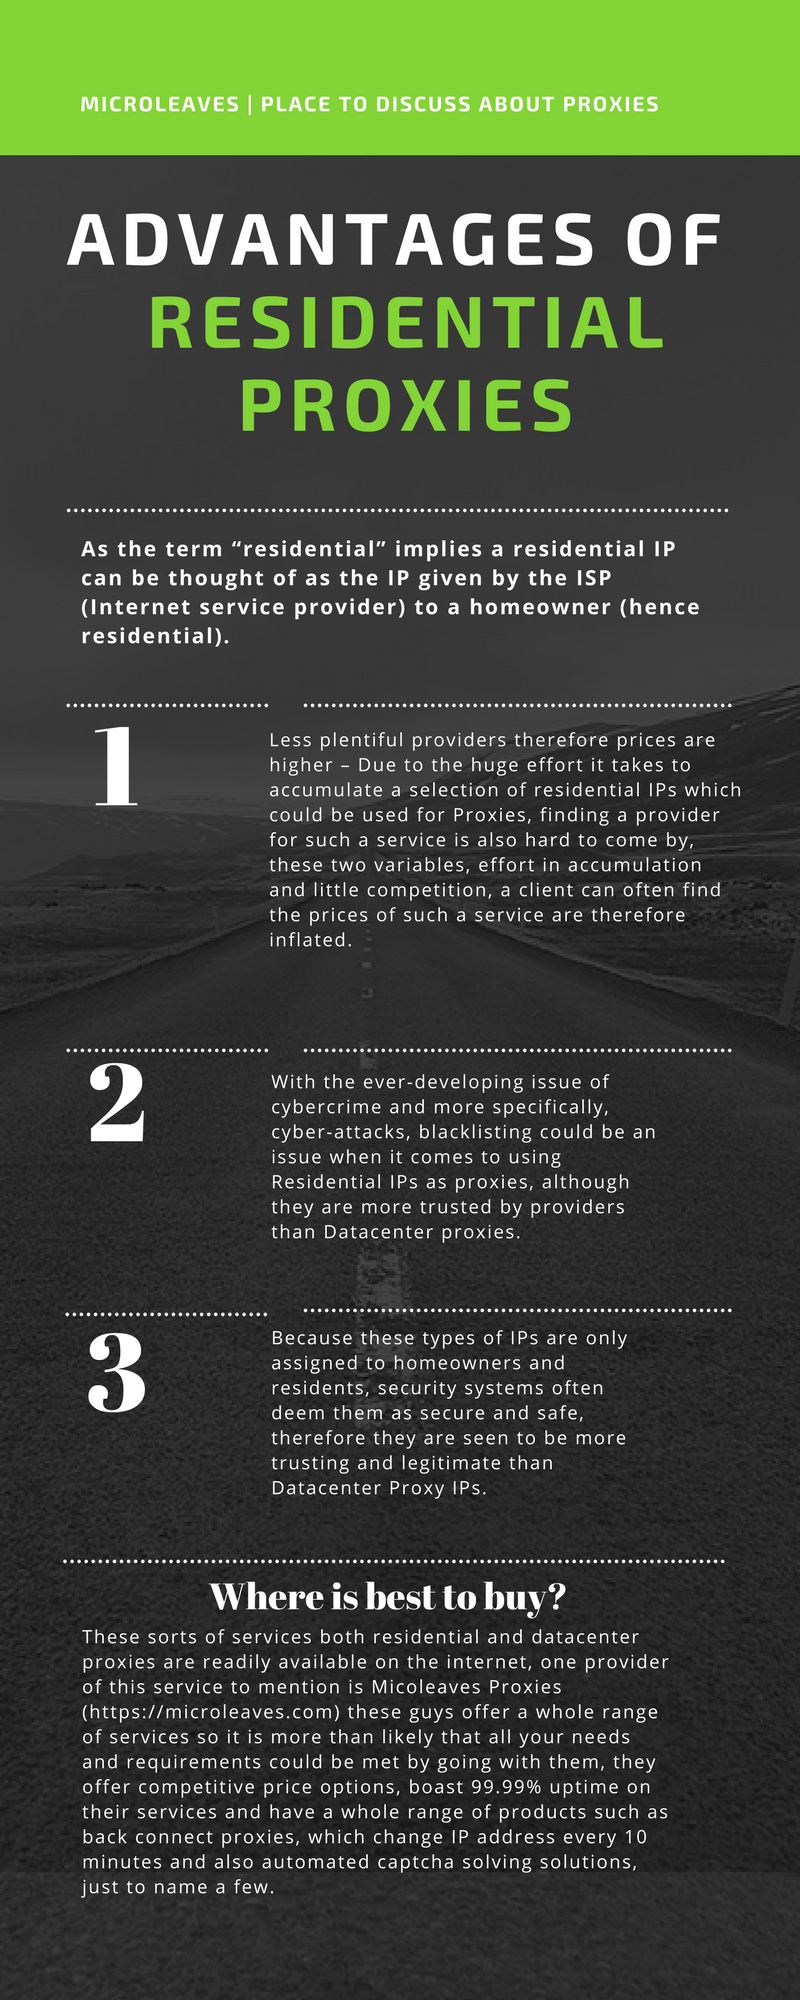 Advantages of Residential Proxies